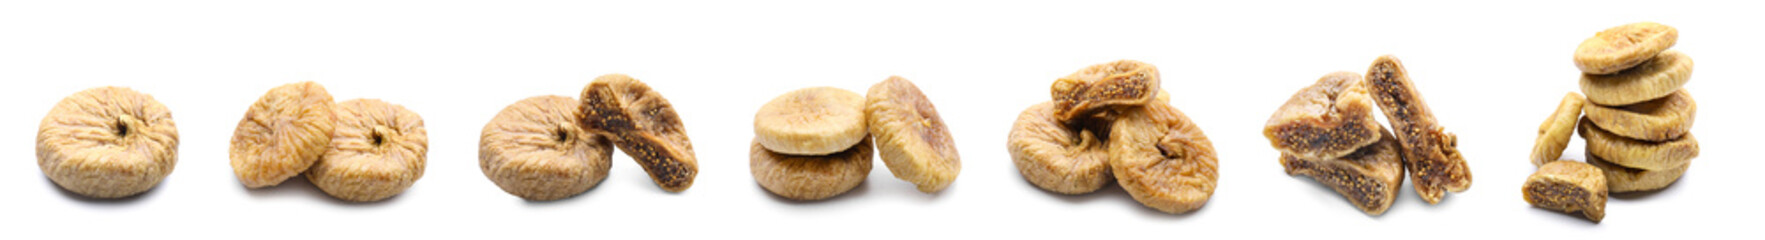 Set of tasty dried figs on white background